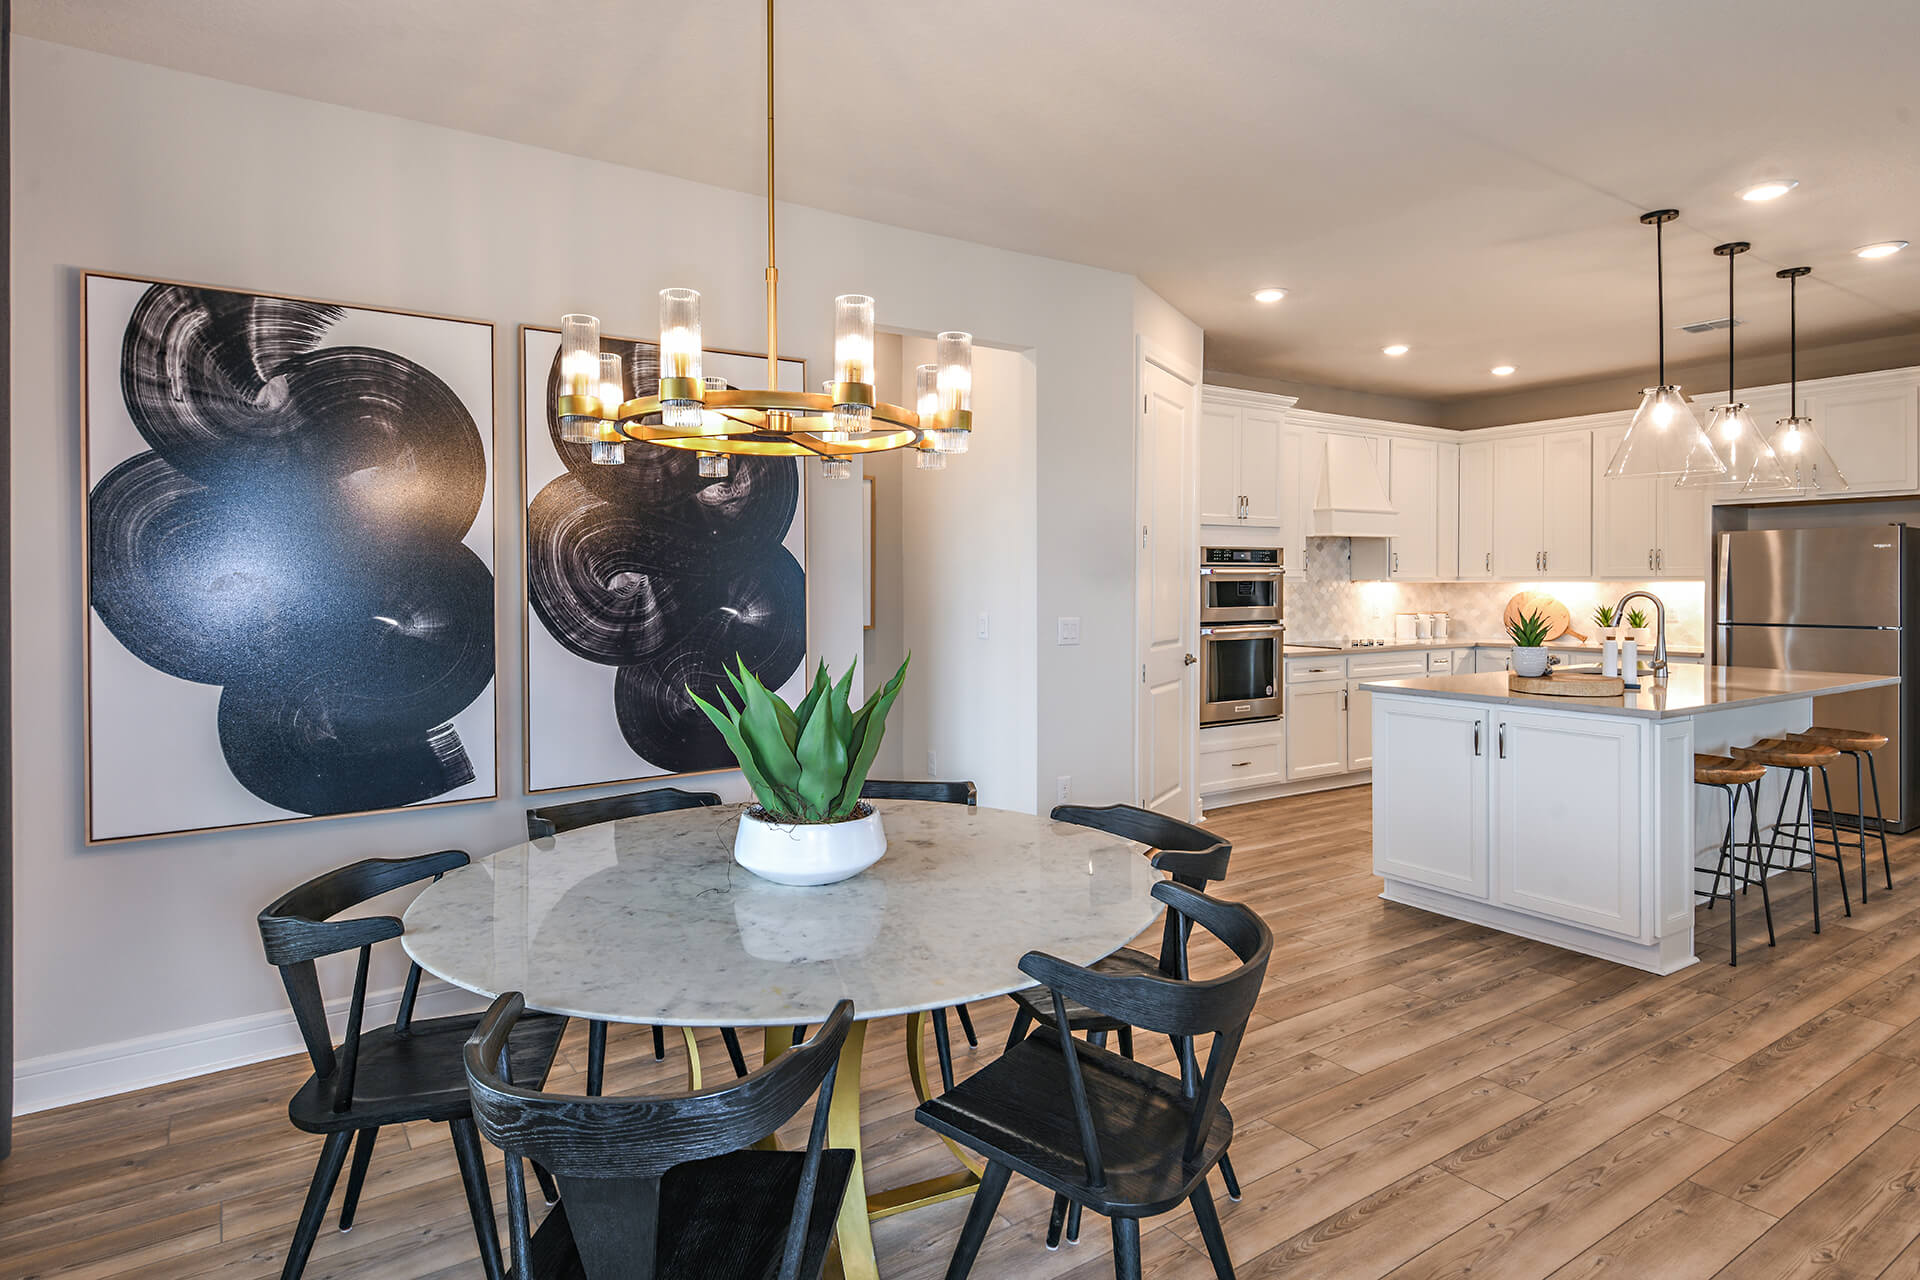 Pulte Homes Mystique dining and kitchen